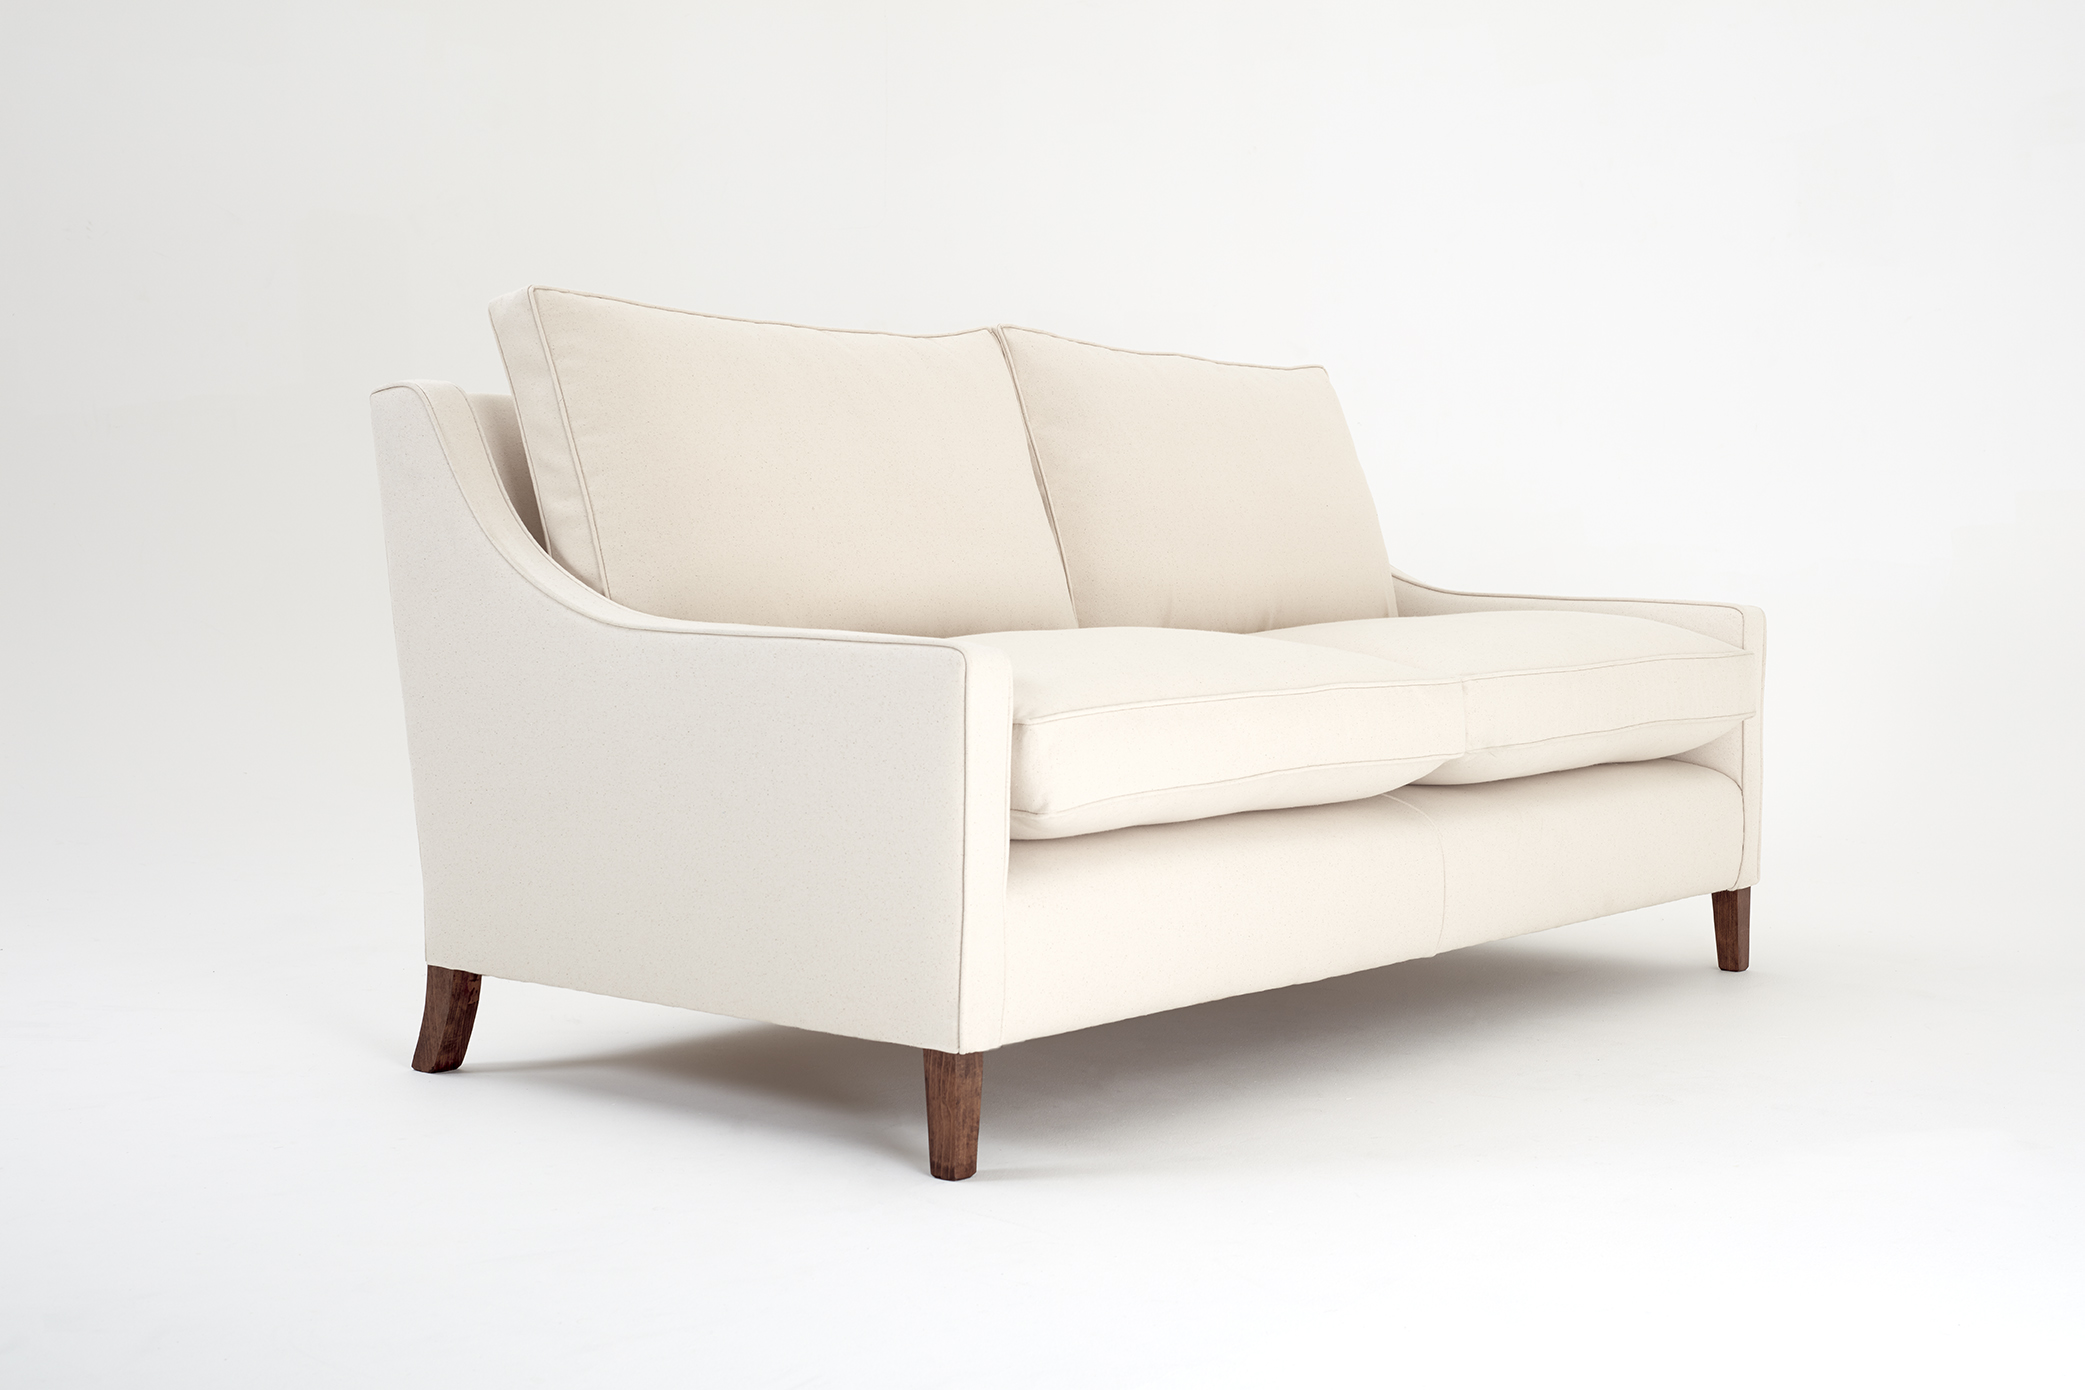 3 seater Betty sofa, Chic lines, clean style and a sharp silhouette